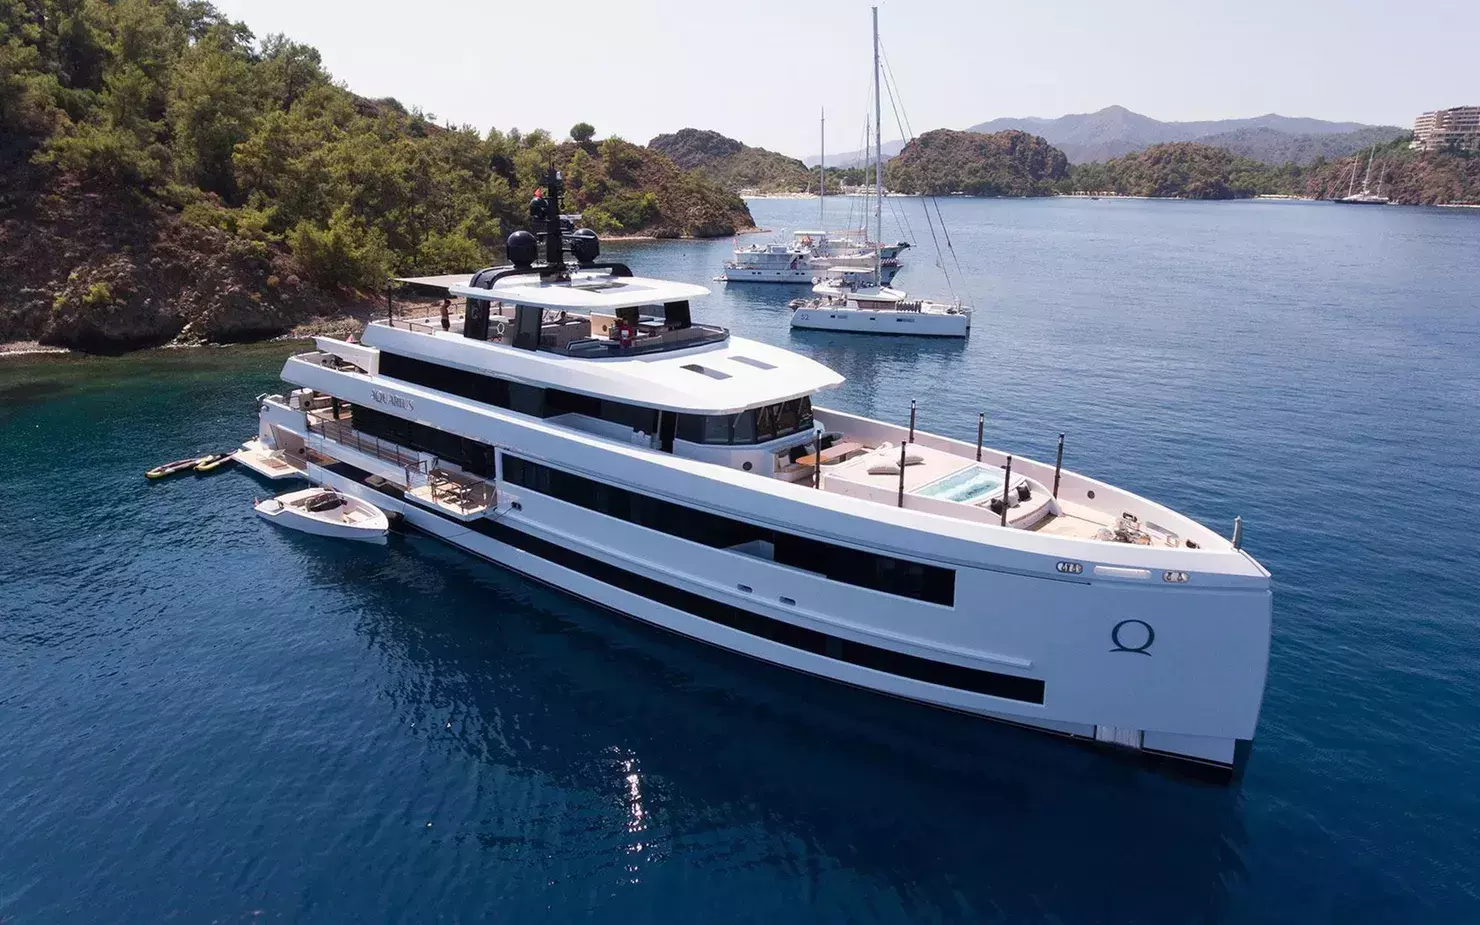 Aquarius by Mengi Yay - Top rates for a Charter of a private Superyacht in Maldives